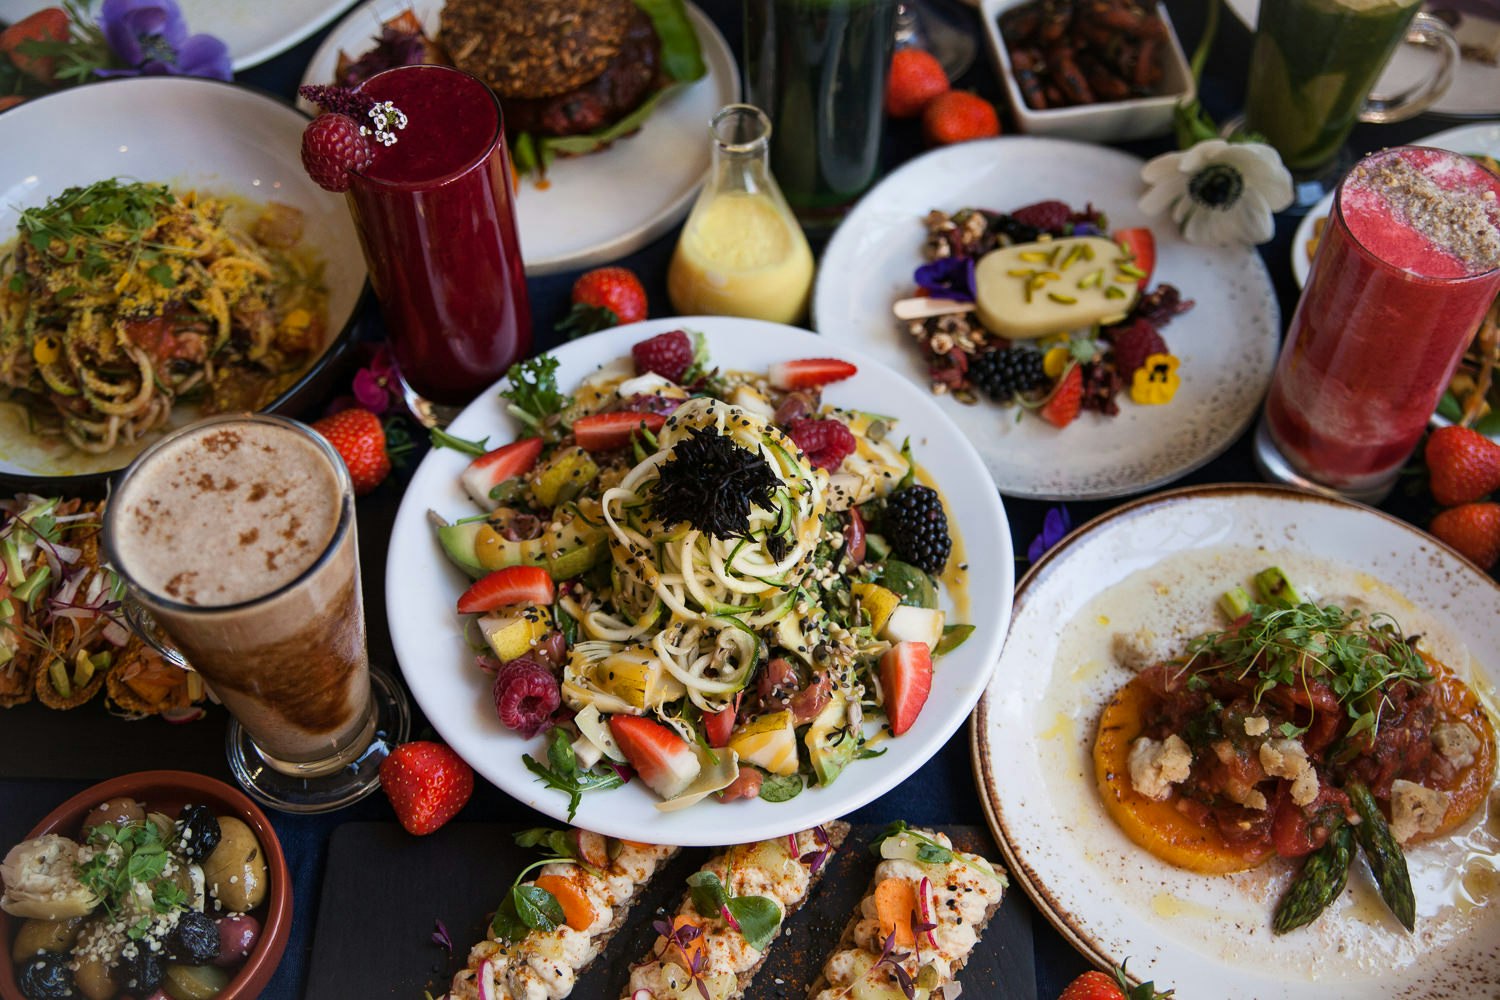 A huge colourful spread of food arranged on a table at the Wild Food Cafe, full of vegetables, fruit, noodles, juices and smoothies.